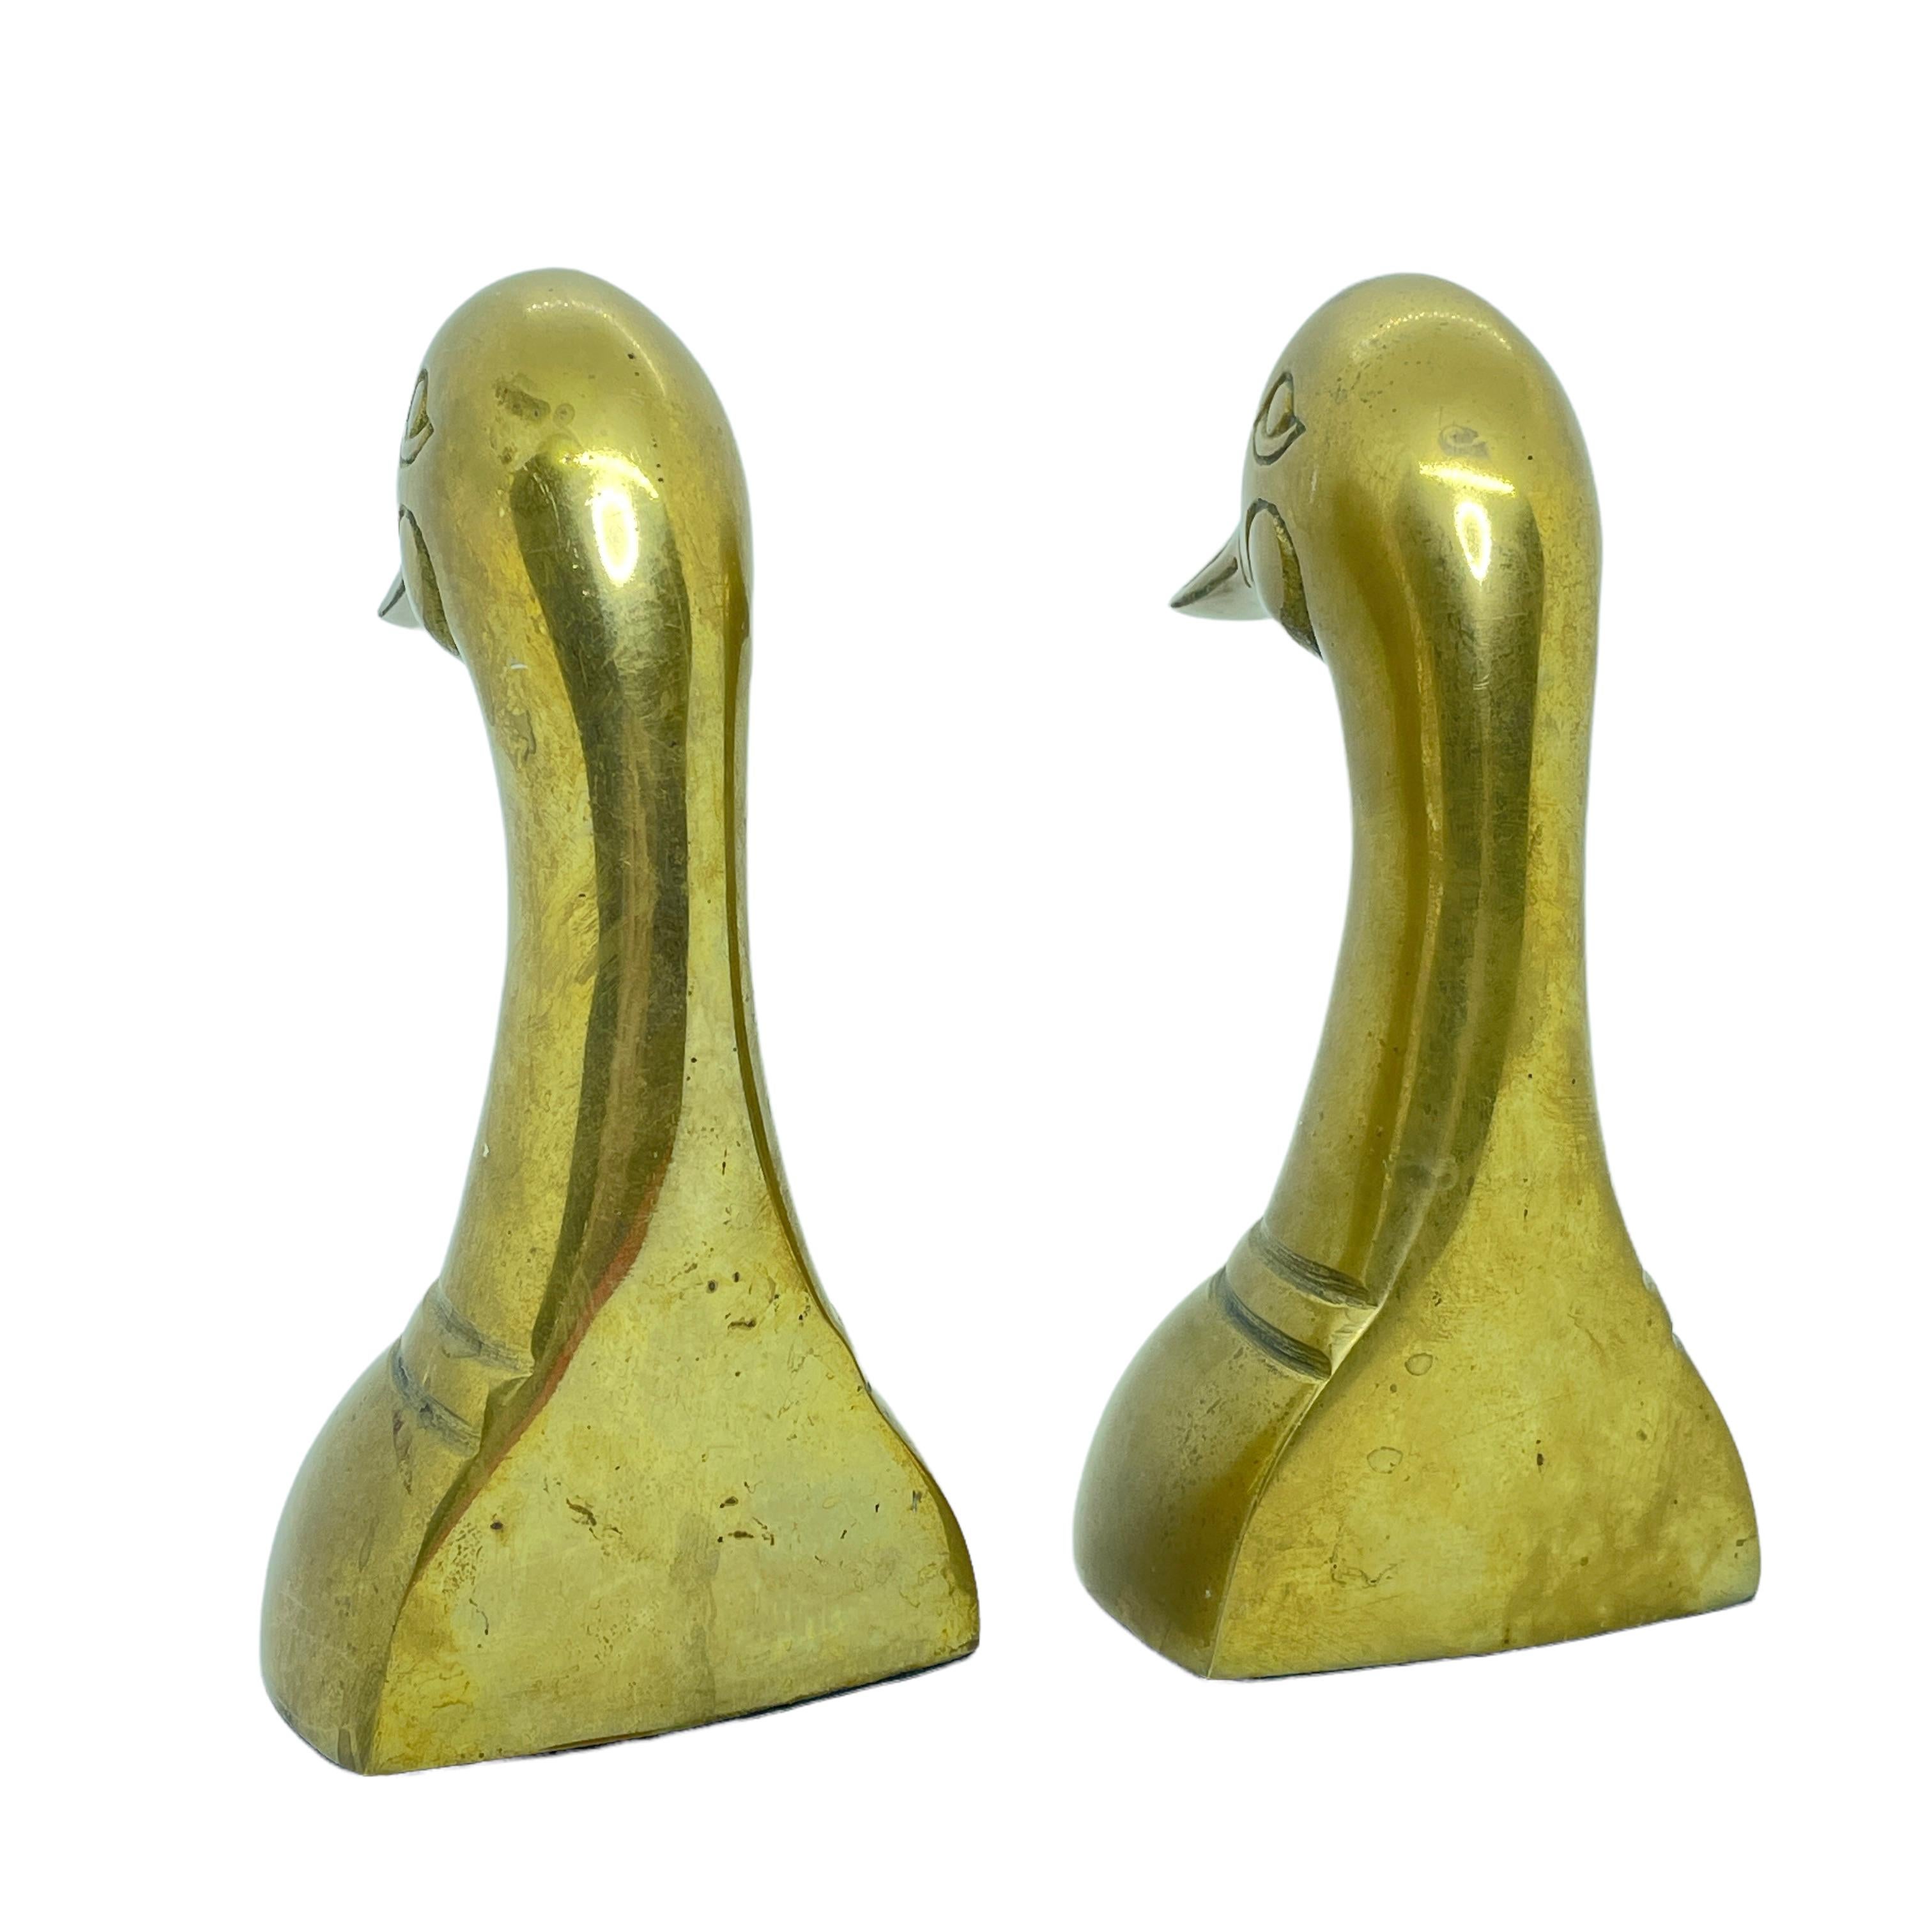 Vintage pair of polished cast brass duck bookends, circa 1950. Pair of polished decorative brass duck bookends in Sarried style. Very sturdy and heavy. Great for holding up books on a bookshelf or as paper weights on a desk or decorative animal